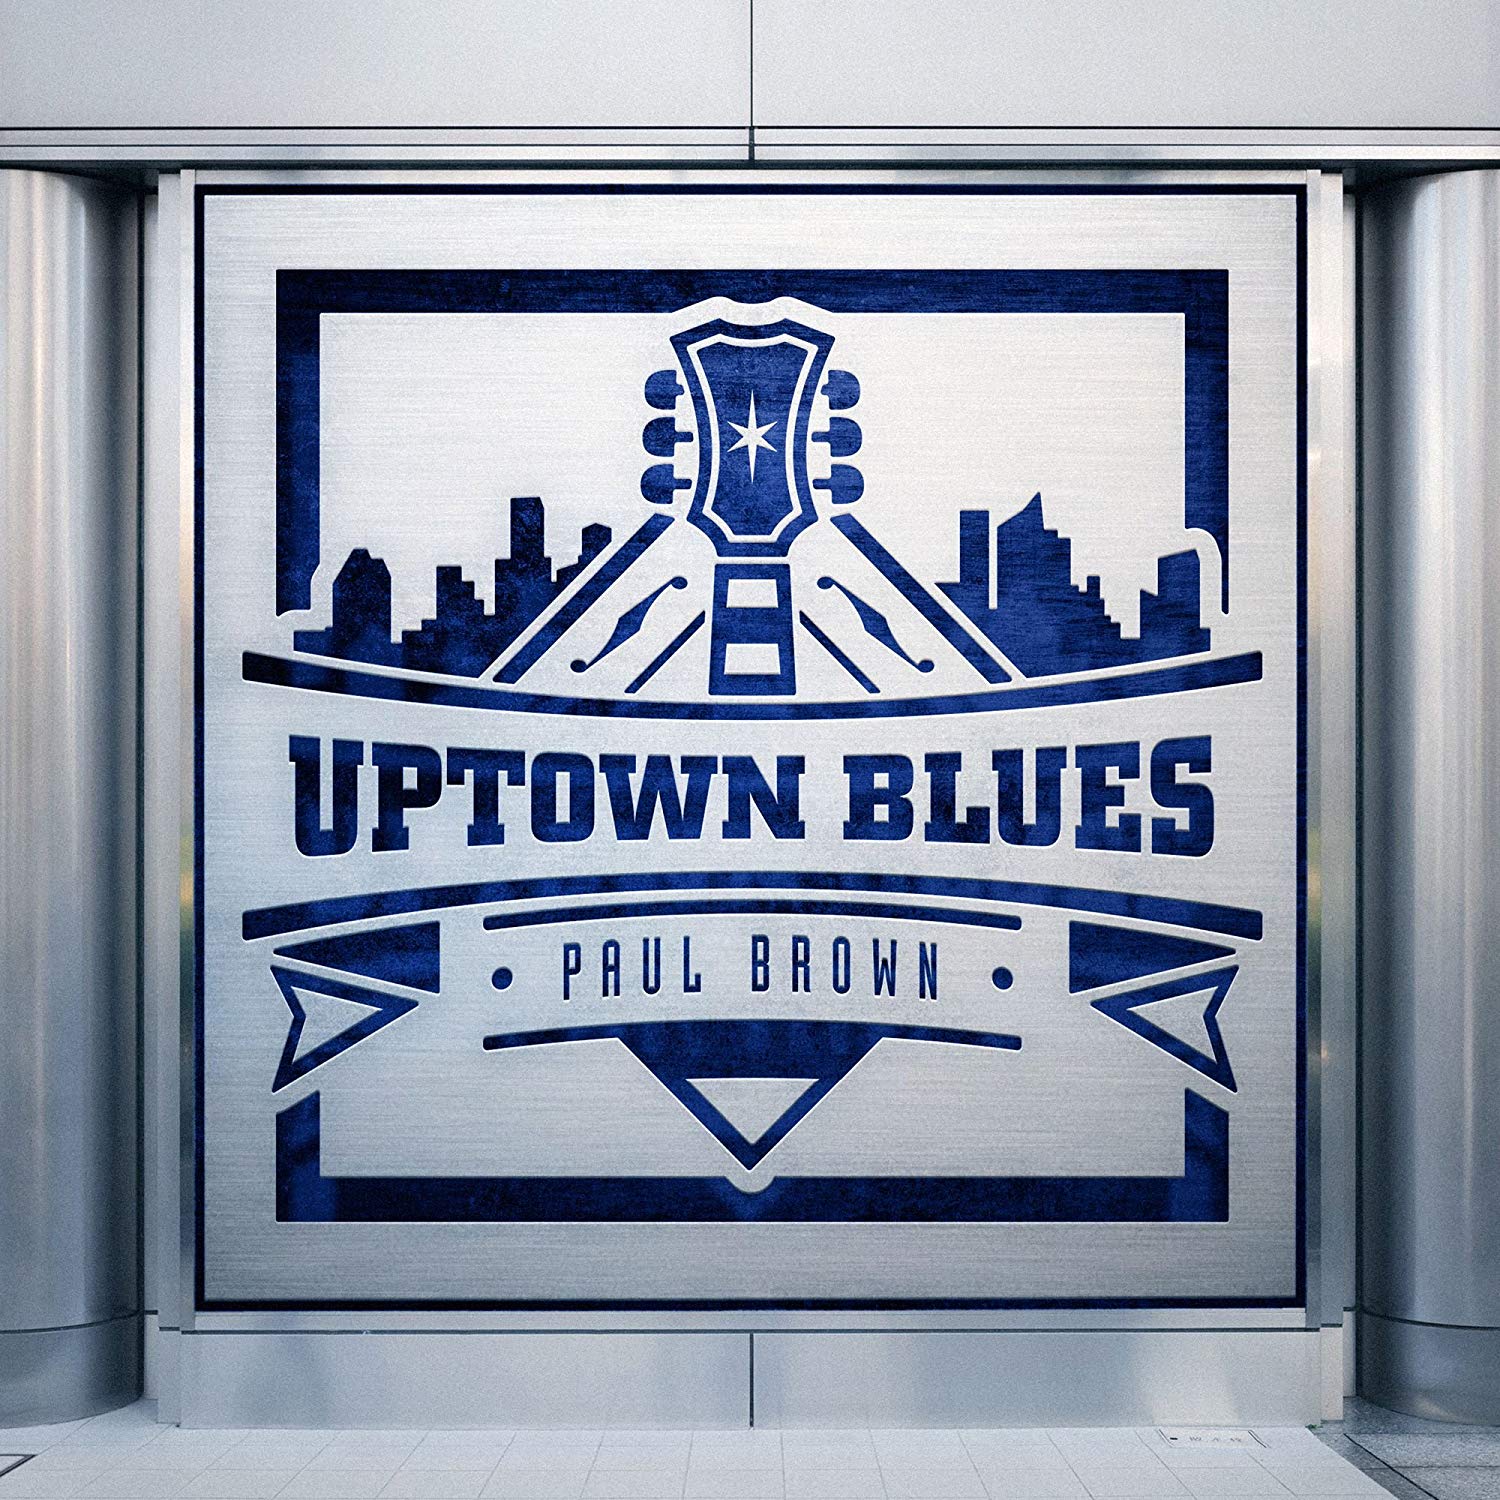 PAUL BROWN - Uptown Blues cover 